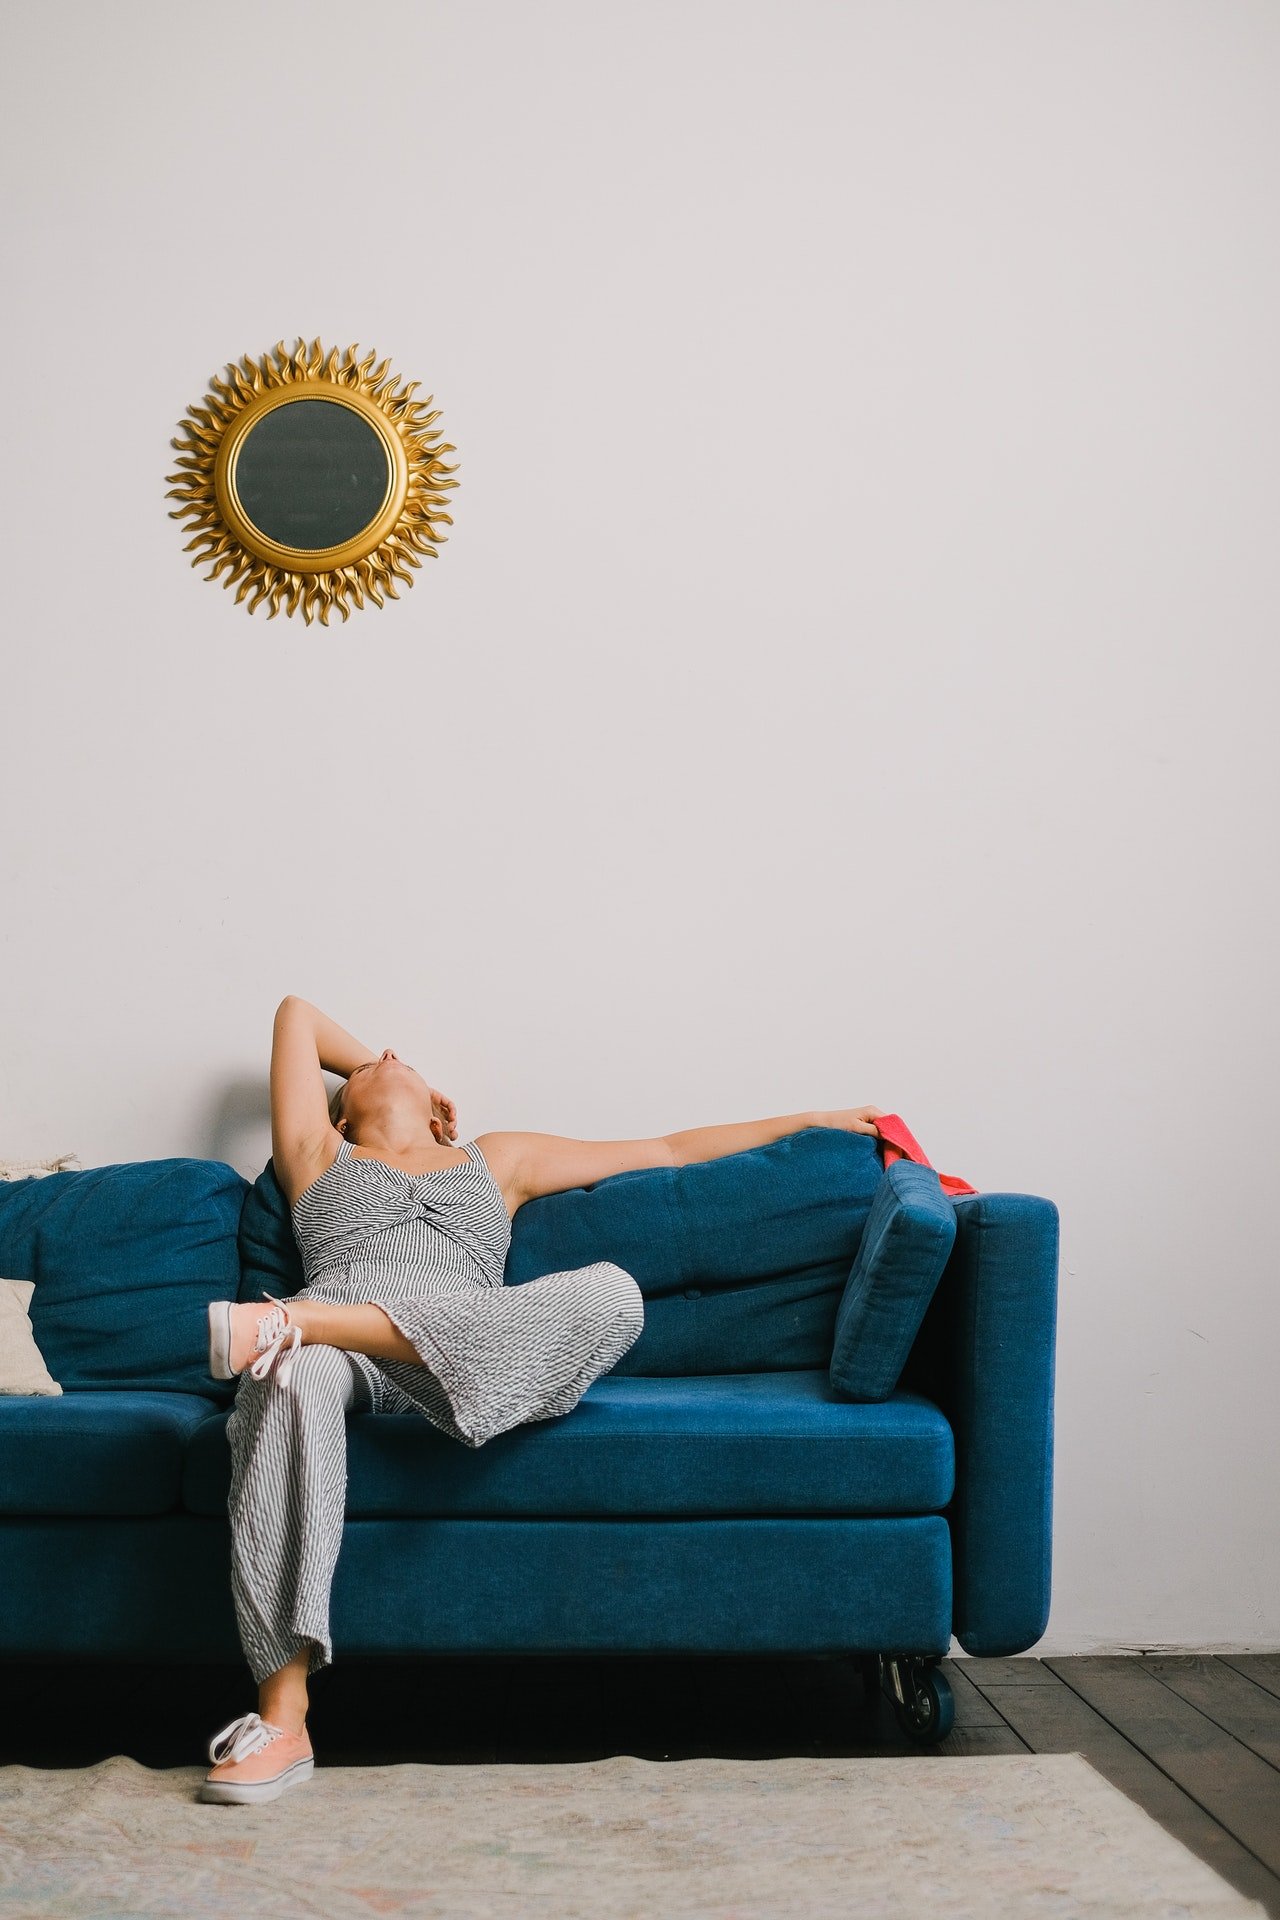 She was so embarrassed about staying at the wrong house. | Source: Pexels